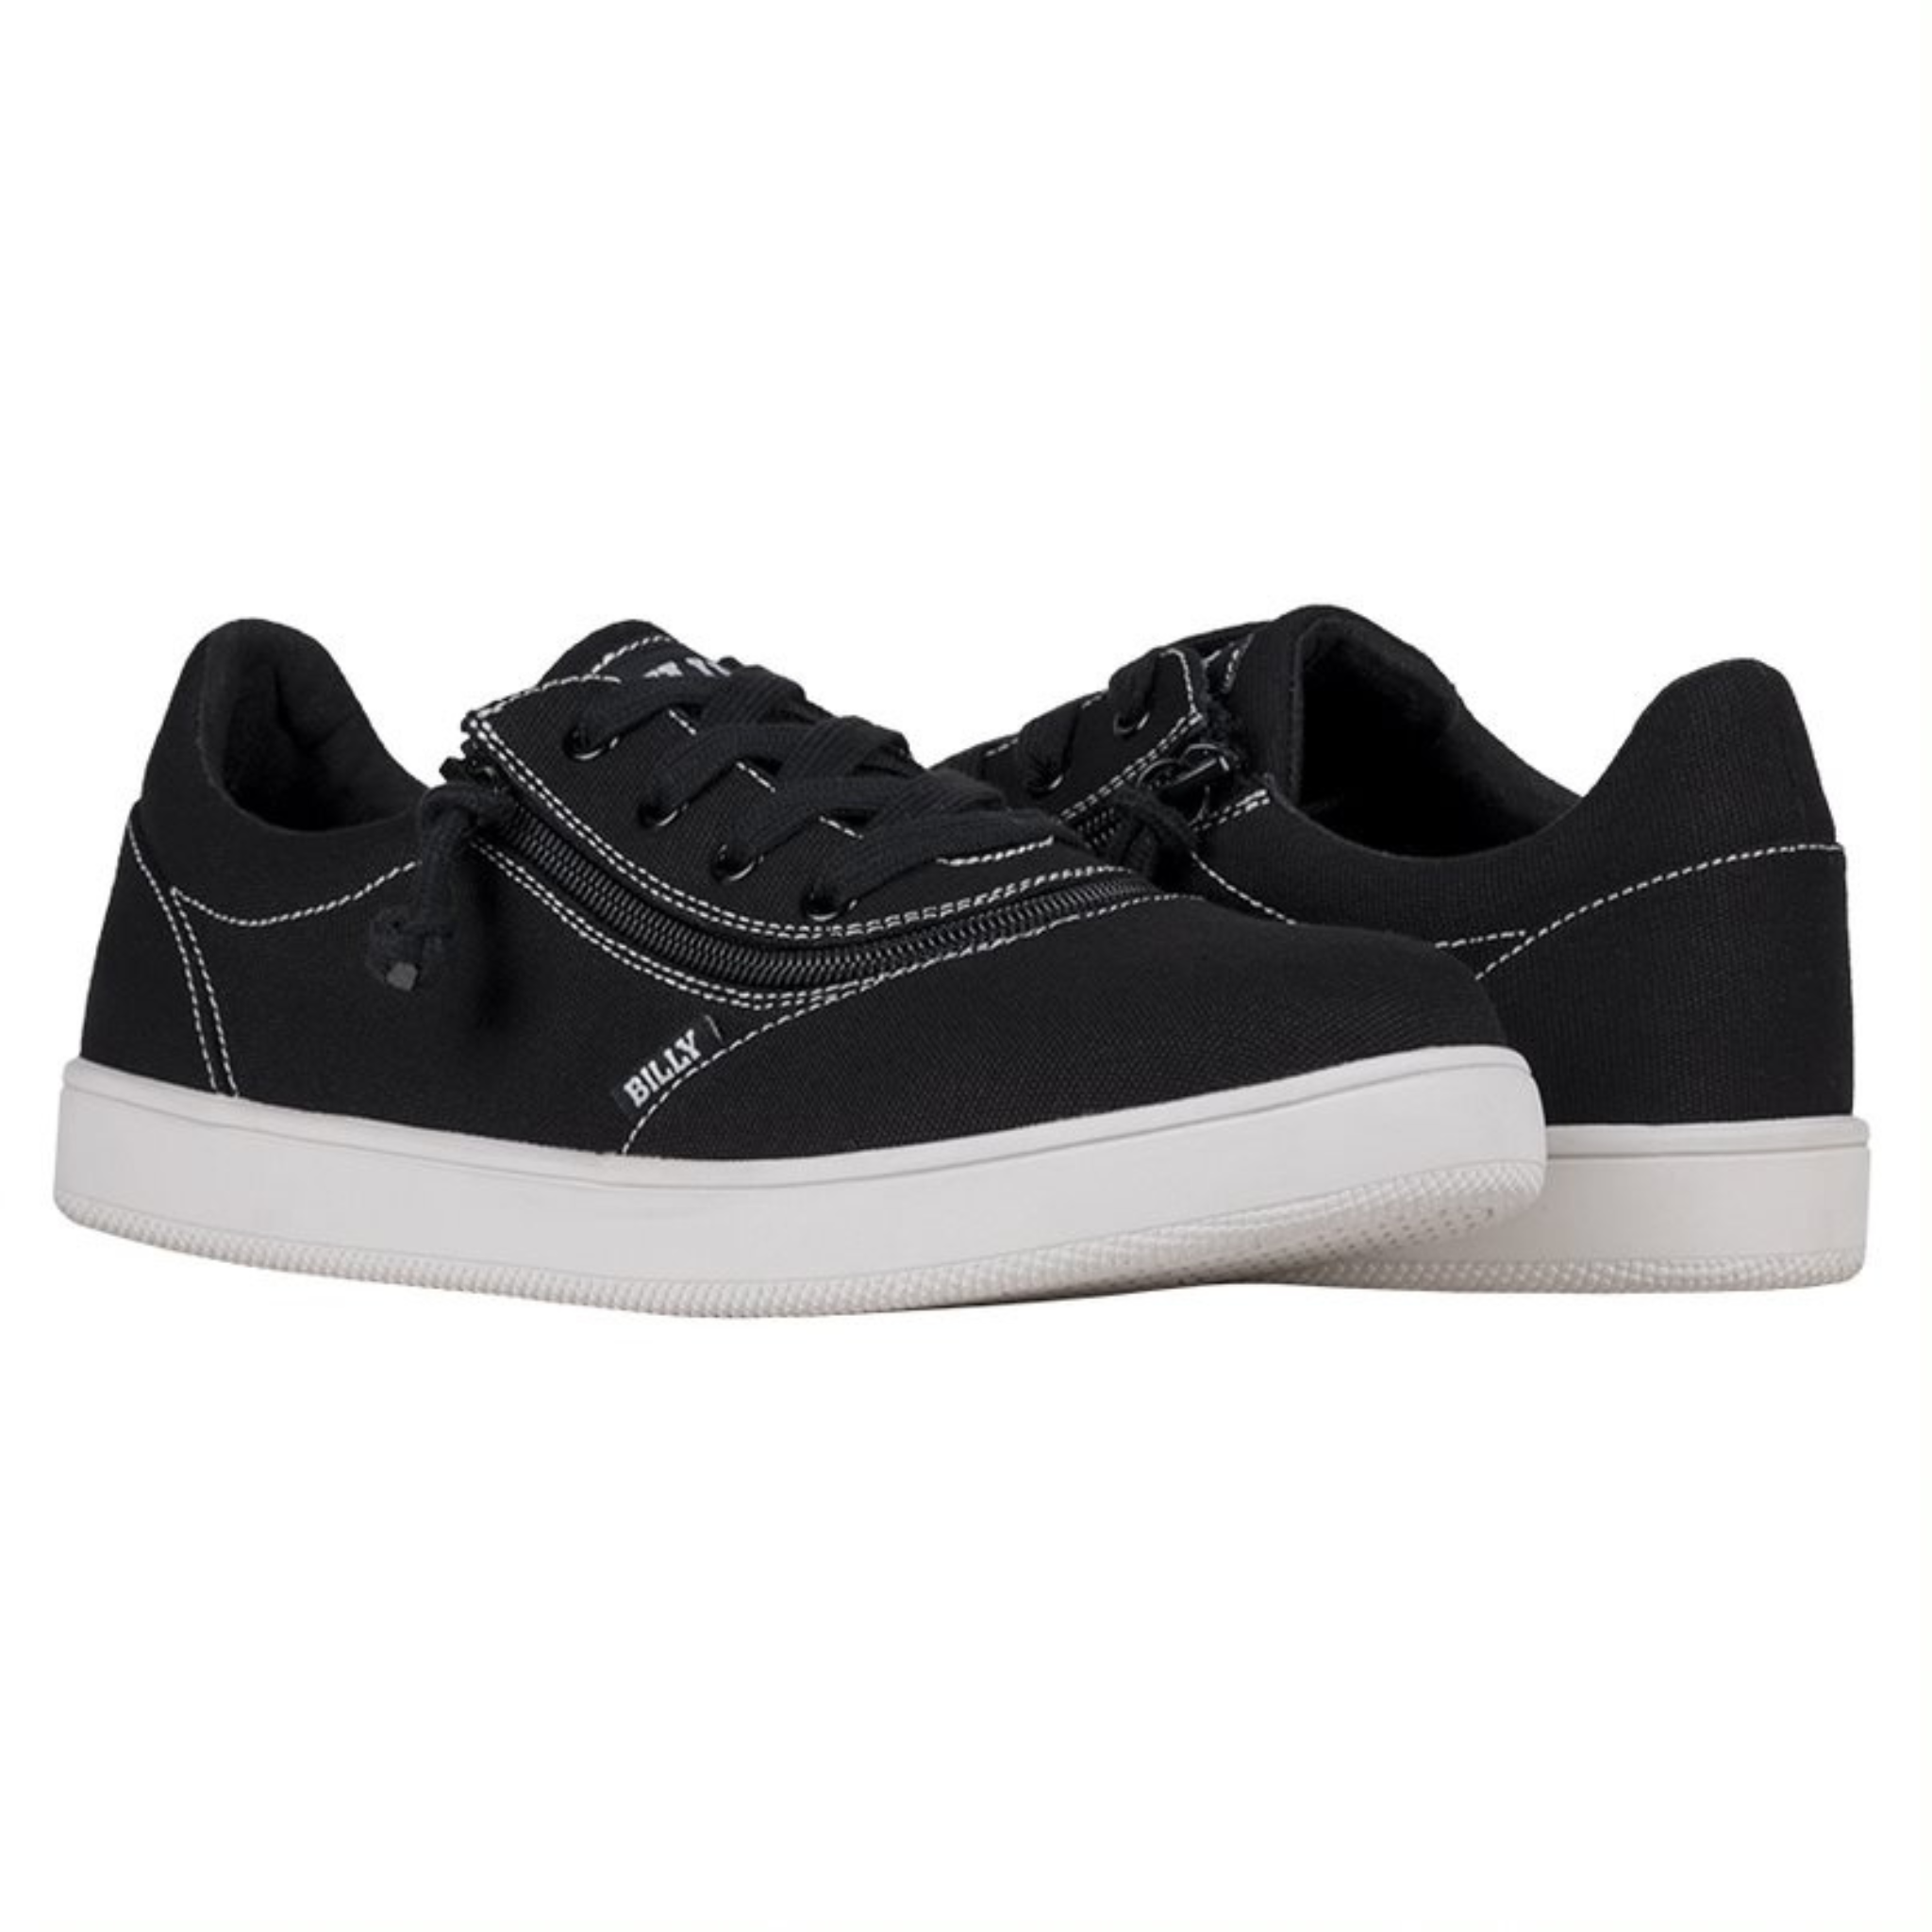 Billy Footwear (Mens) Short Wrap Low Top Canvas Black/White Stitch Shoes